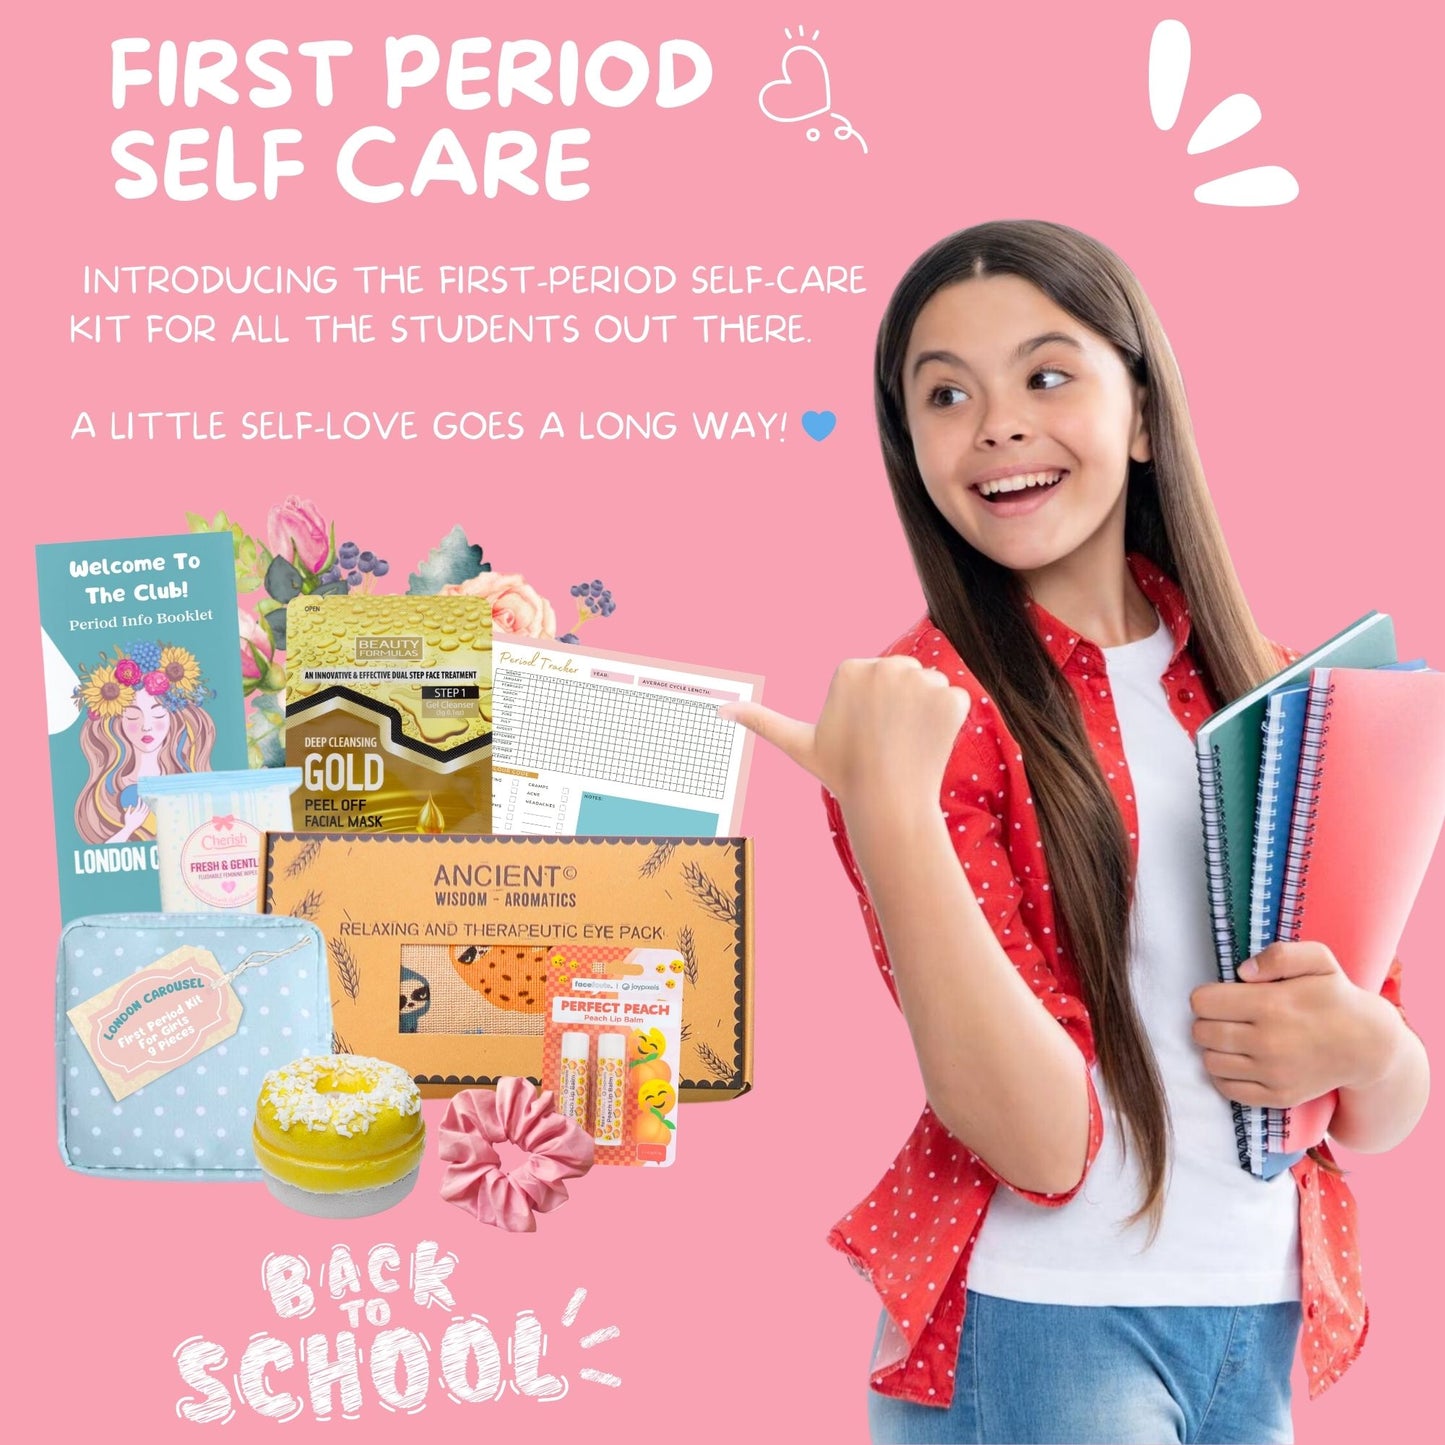 First Period Kit for Girls - Pamper Hamper with Heating Pad, Self-Care & Tracker